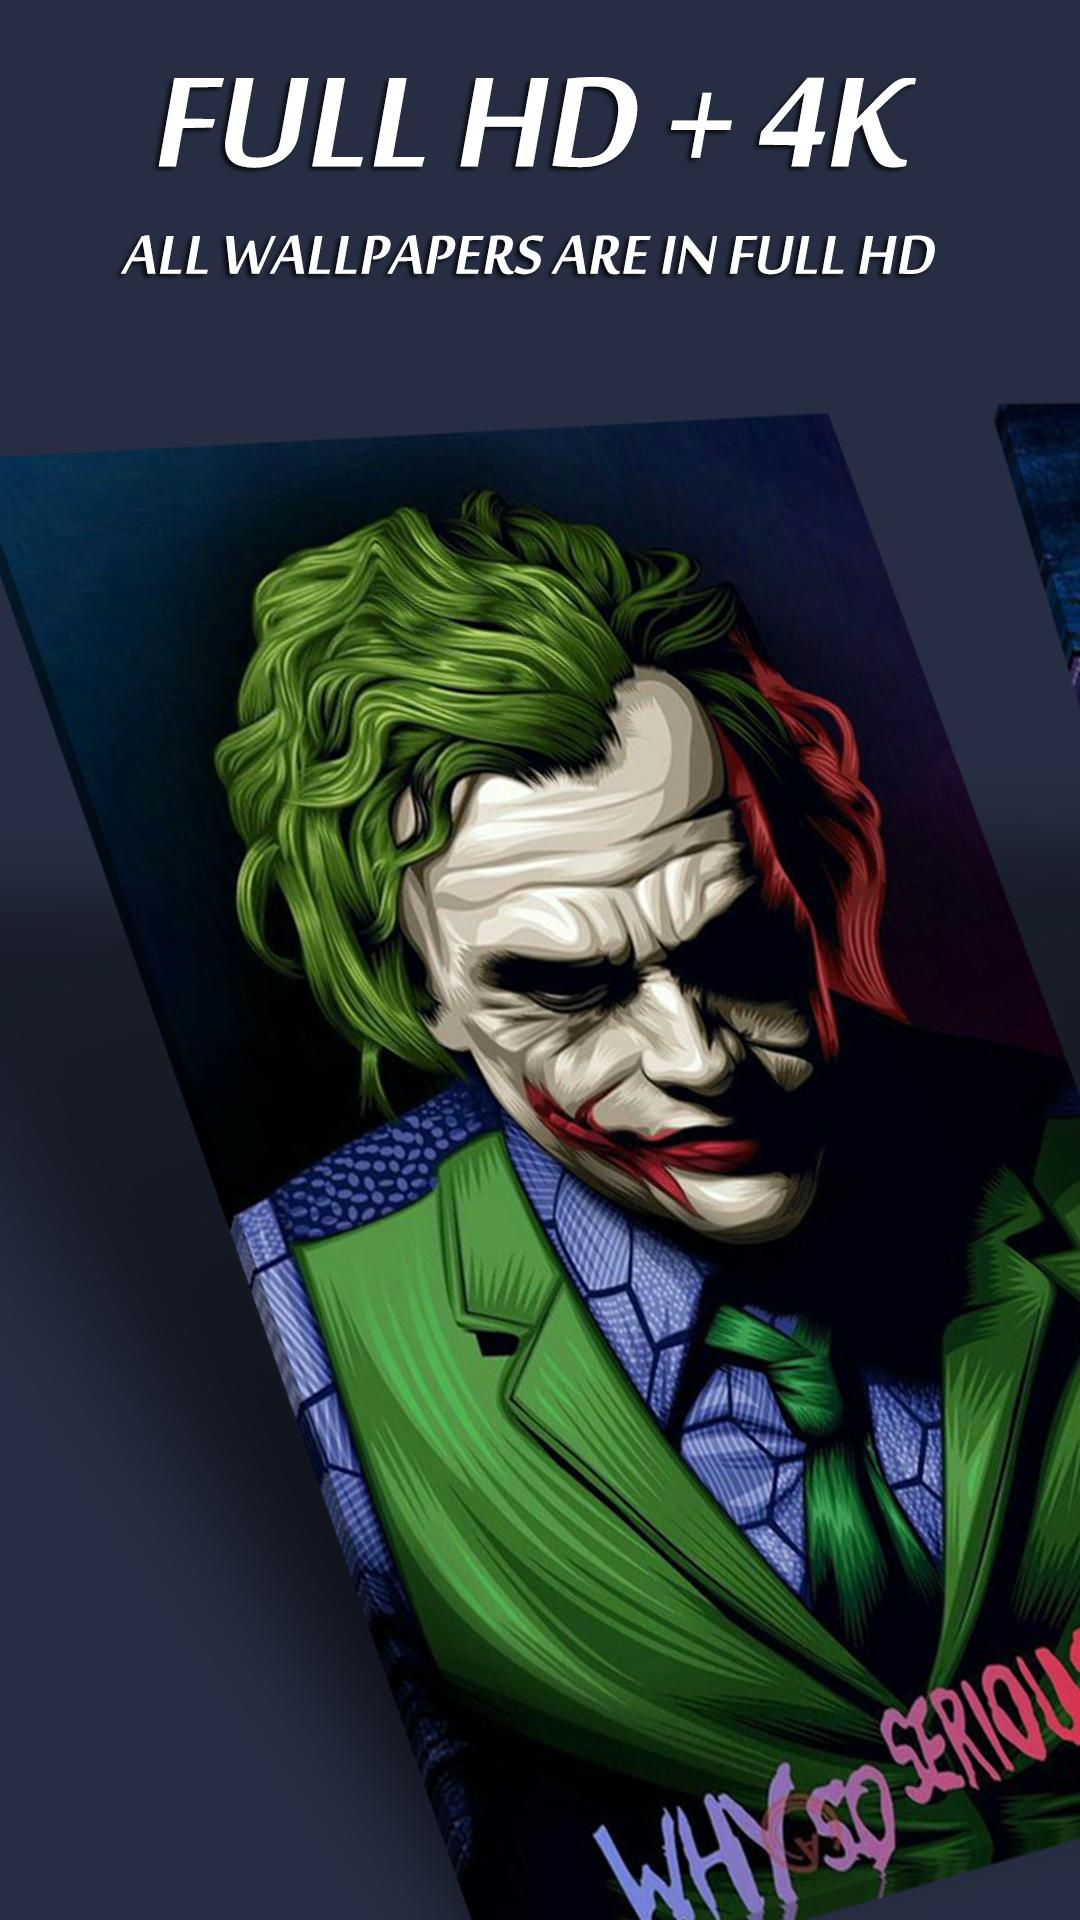 New Joker  Wallpapers  HD  4K  for Android  APK Download